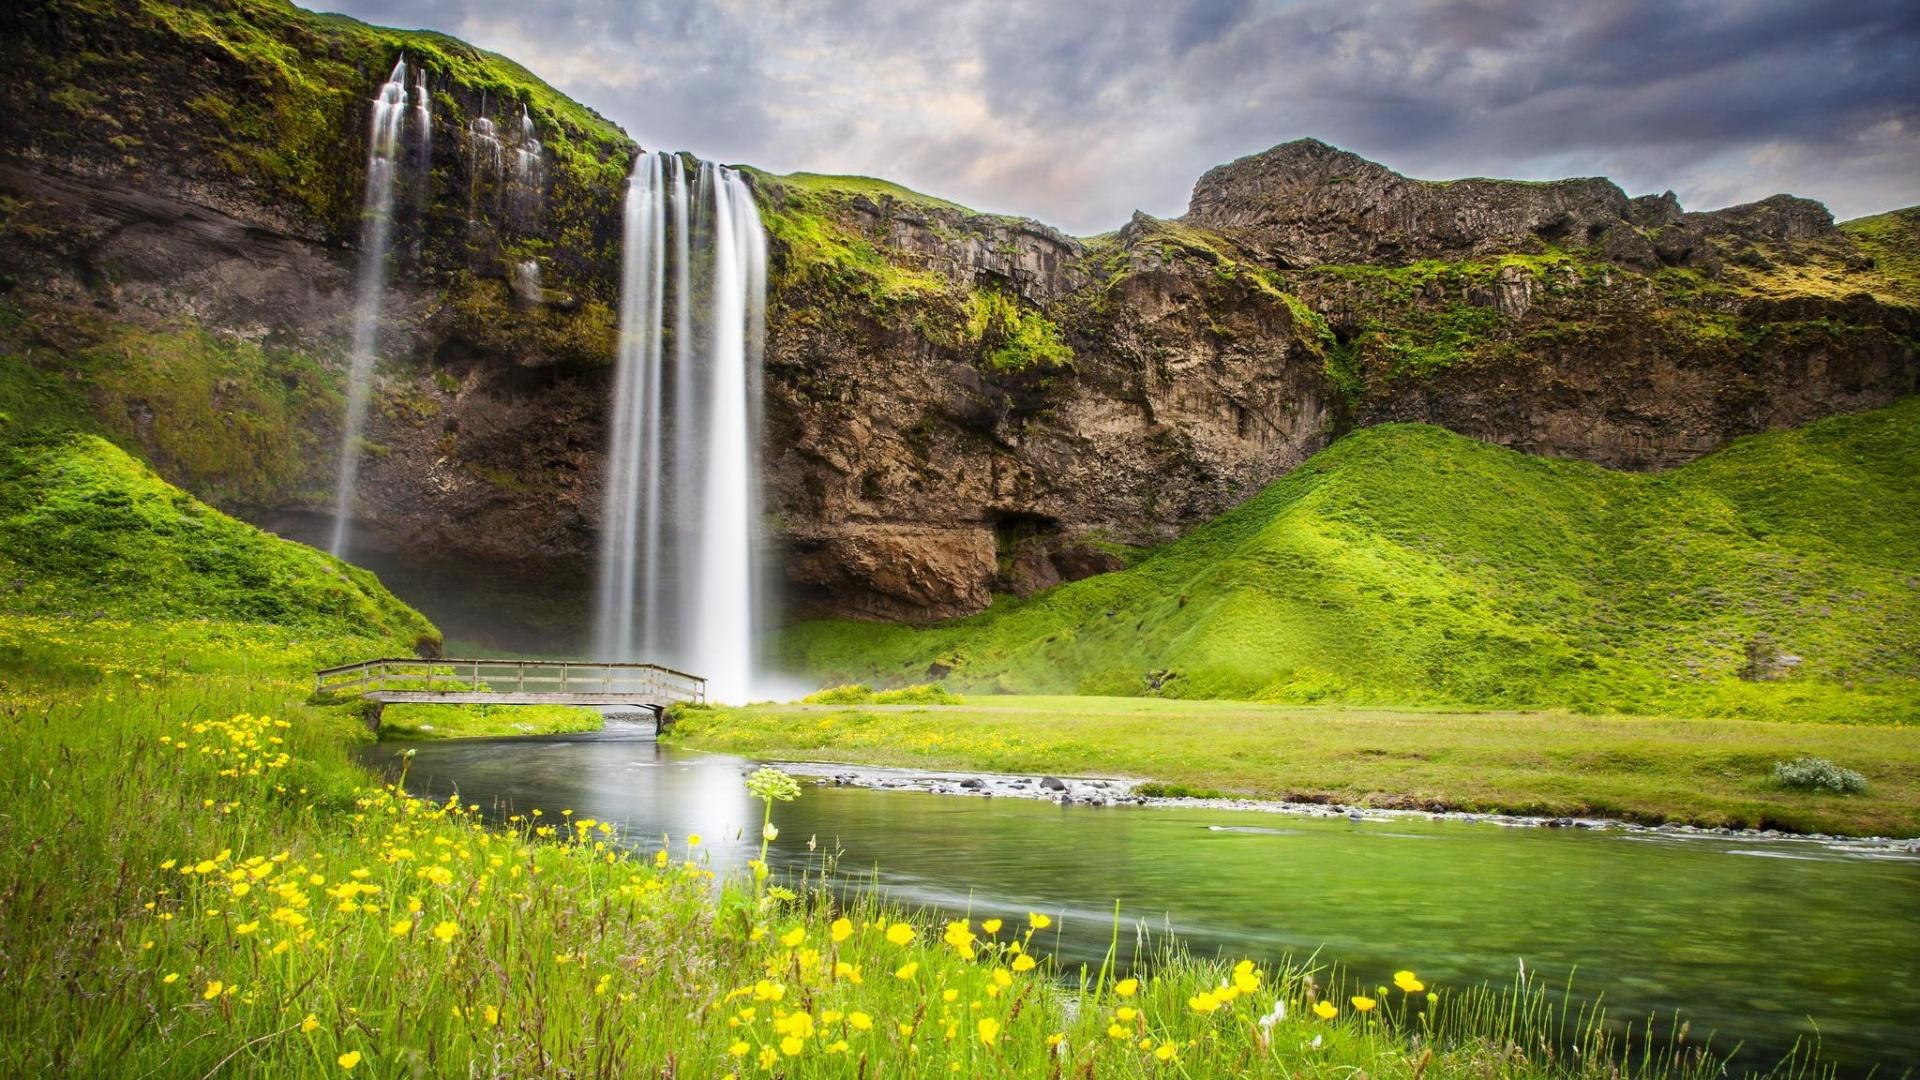 Waterfall River Summer Landscape 1920 x 1080 Download Close